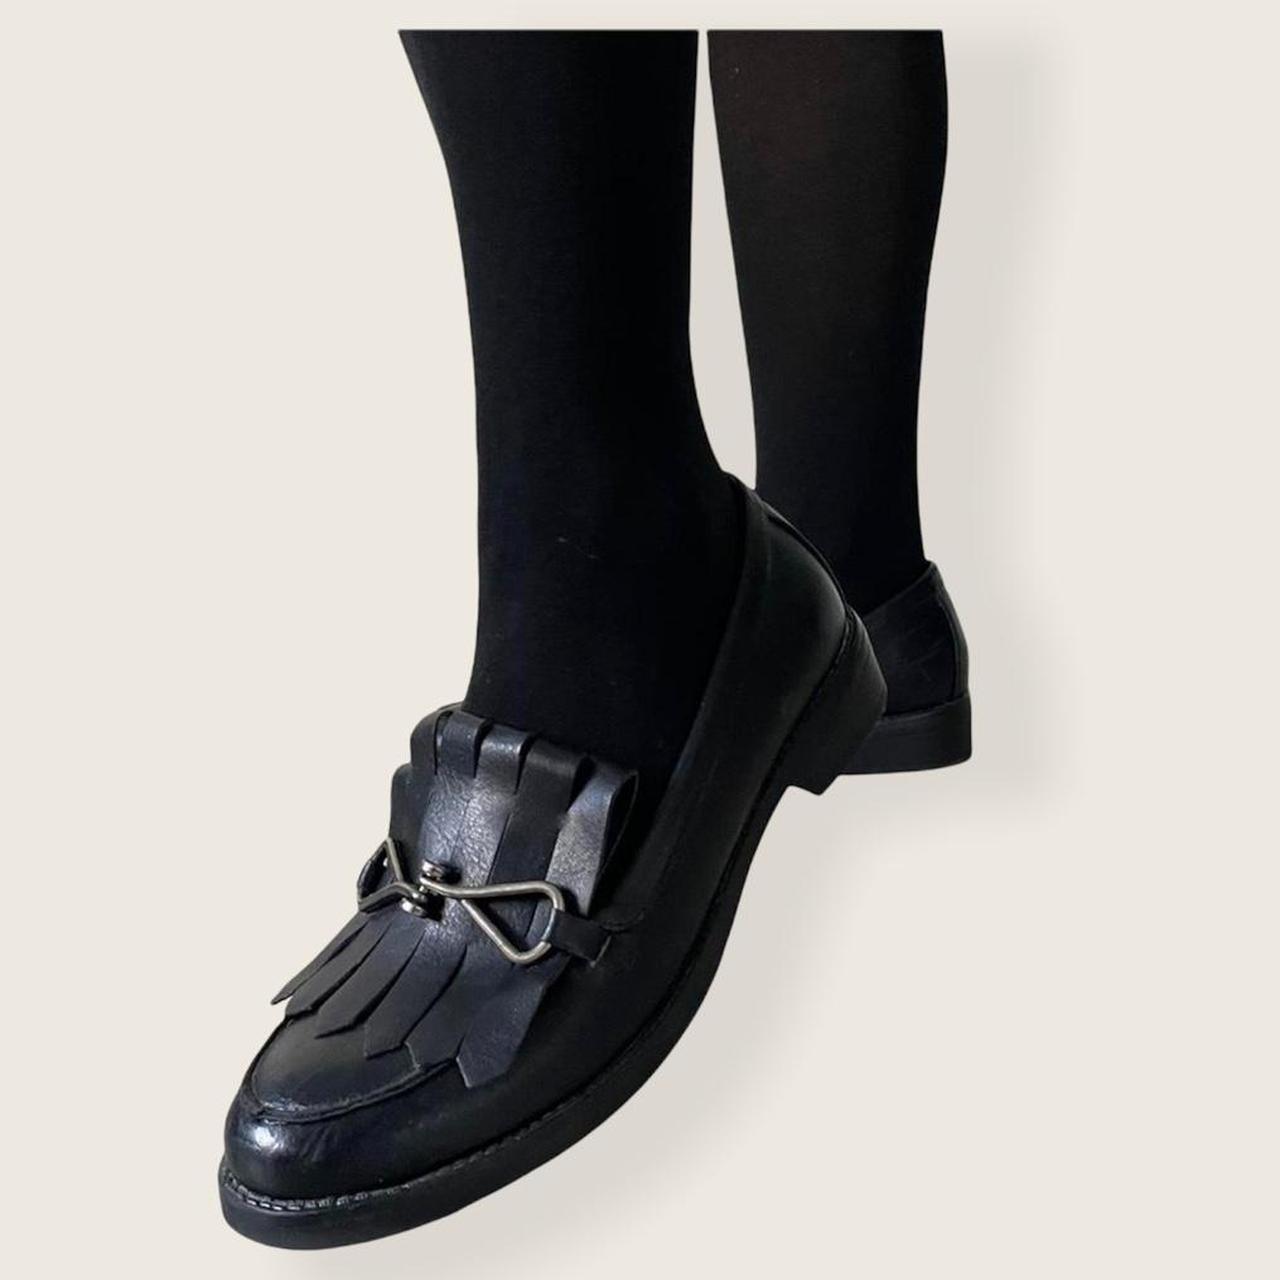 Product Image 2 - Dark acadamia loafers 🕷

Black loafer